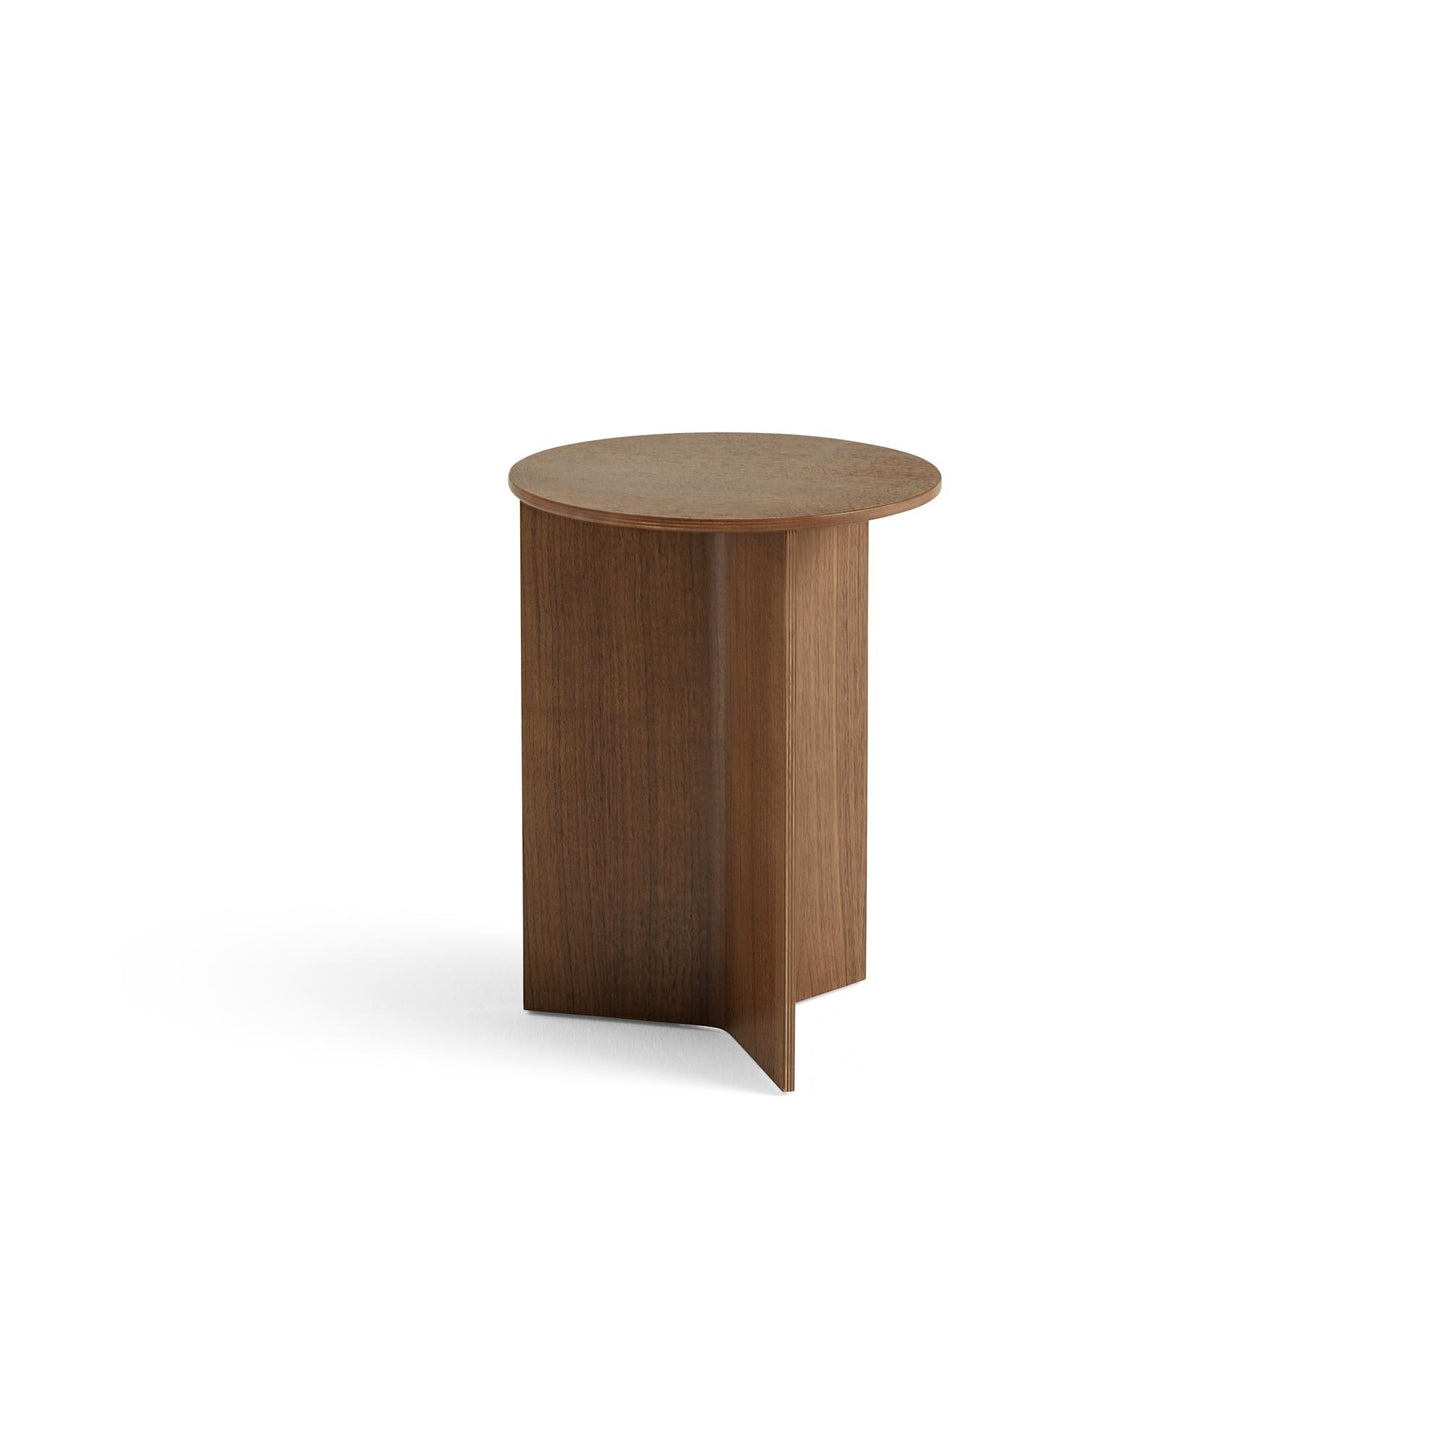 Slit Wood Coffee Table Round Ø35 by HAY #Lacquered Walnut